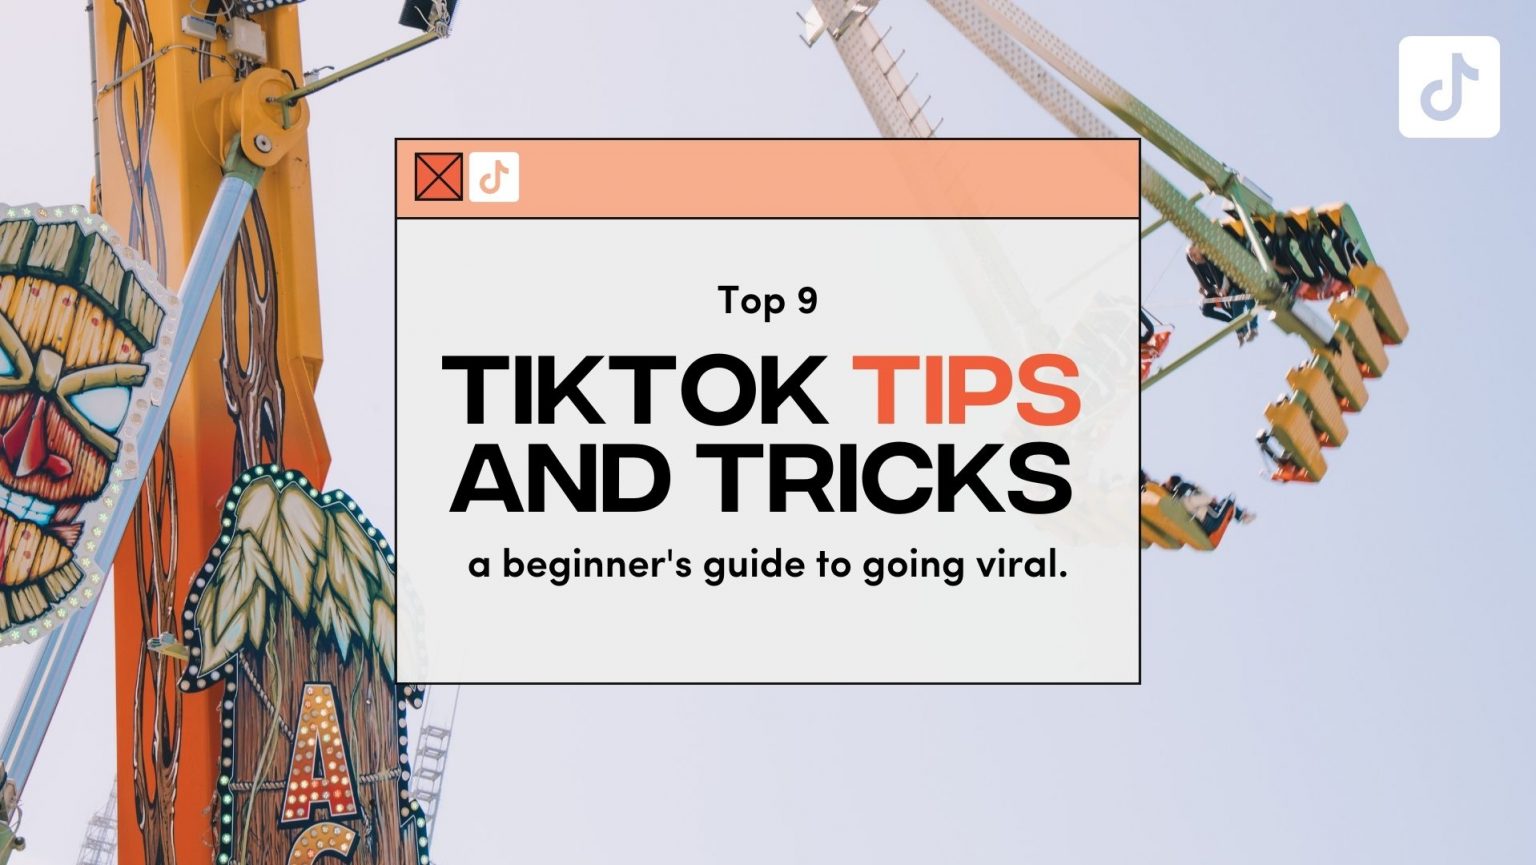 The Top 5 TikTok Tips & Tricks Beginners Guide To Going Viral